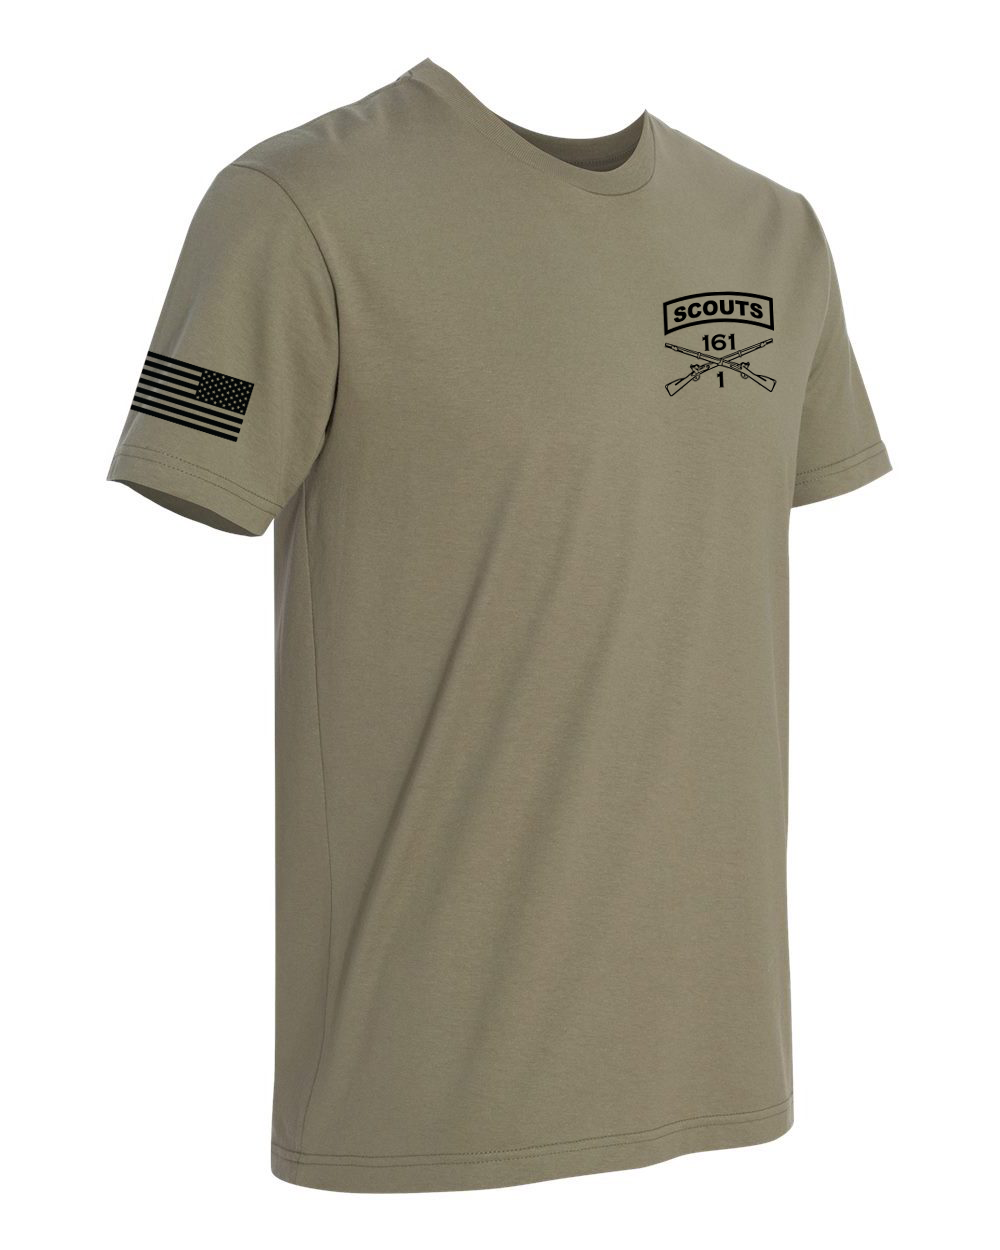 1-161 IN, HHC, Scout Platoon Comfort Unisex Cotton SS Tee - H8Dx2b